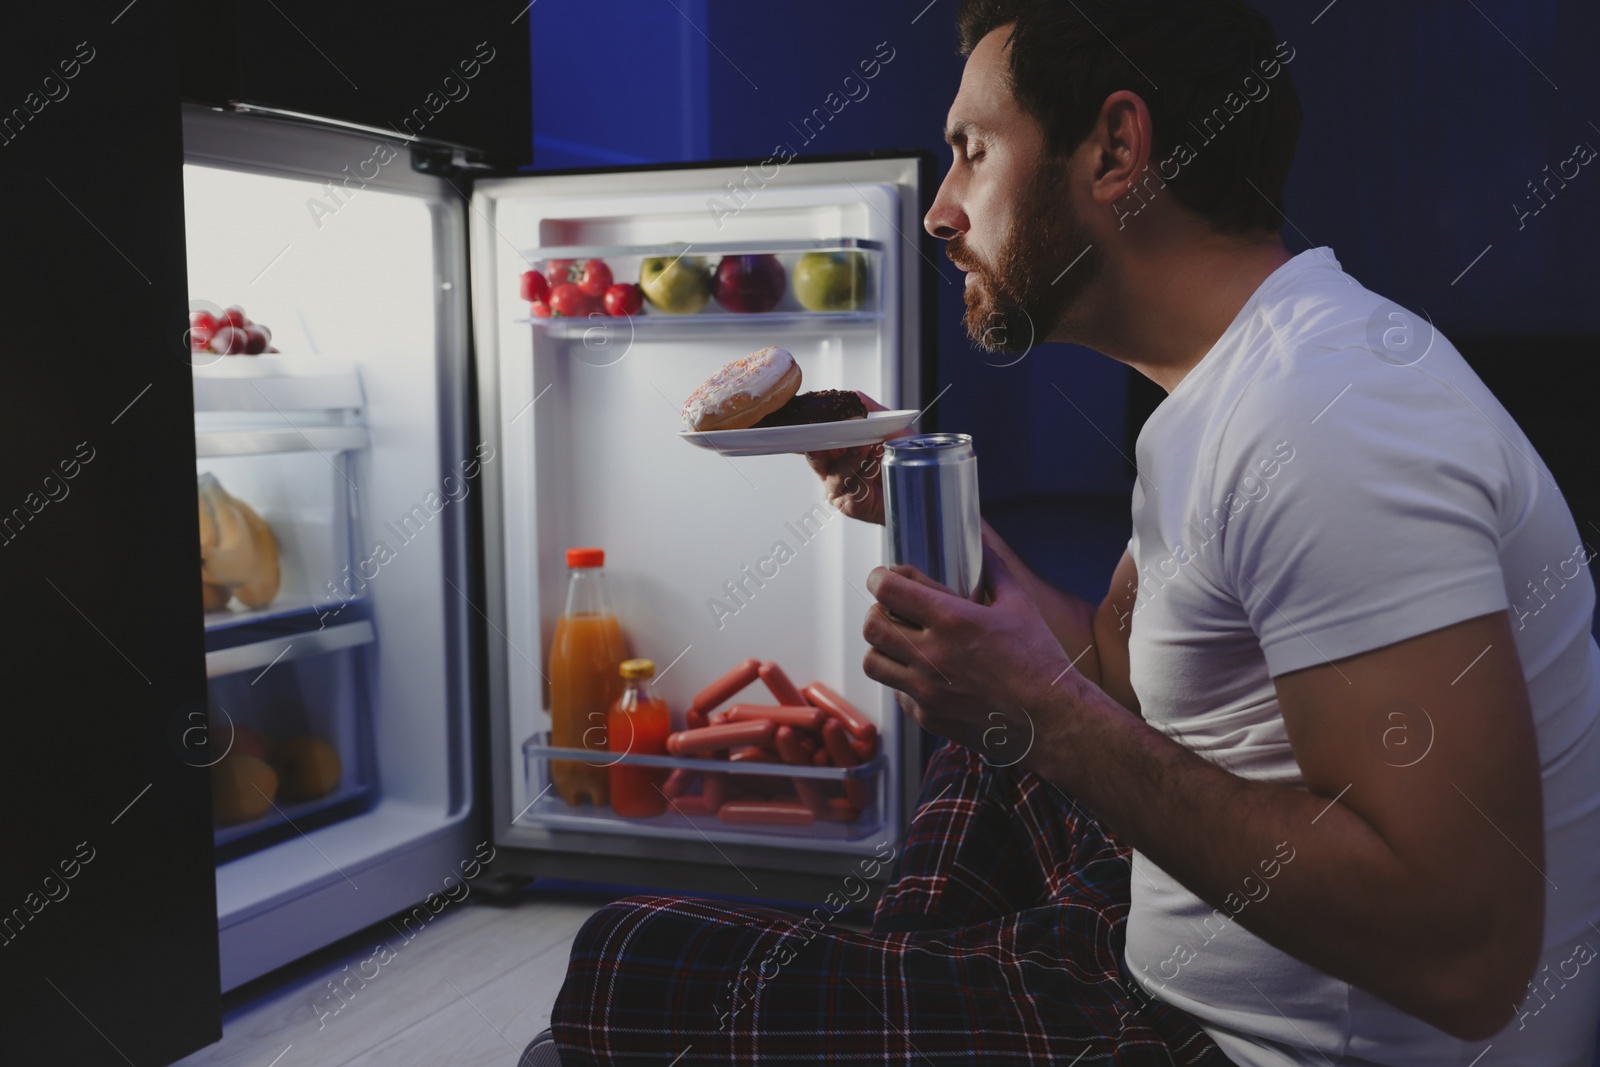 Photo of Man with donuts and drink near refrigerator in kitchen at night. Bad habit